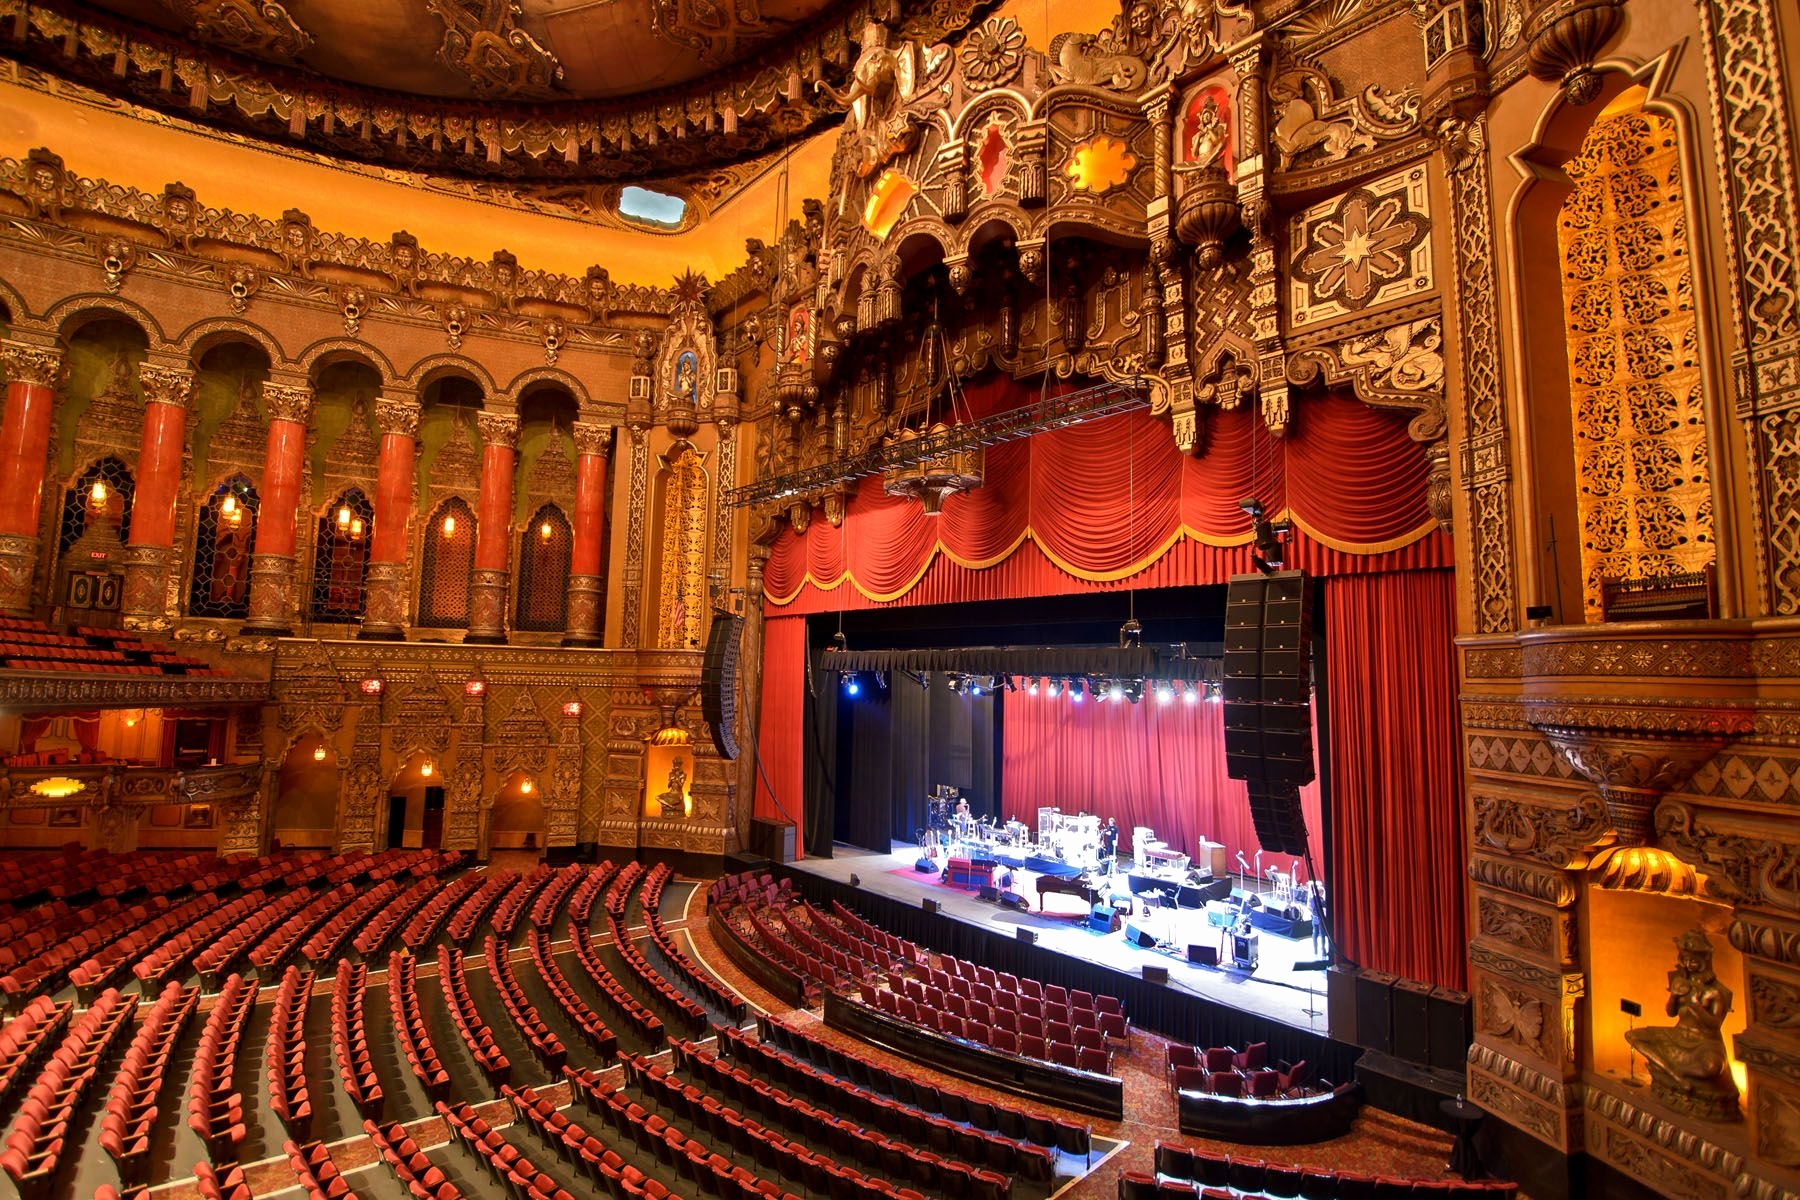 detroit opera house seating pictures